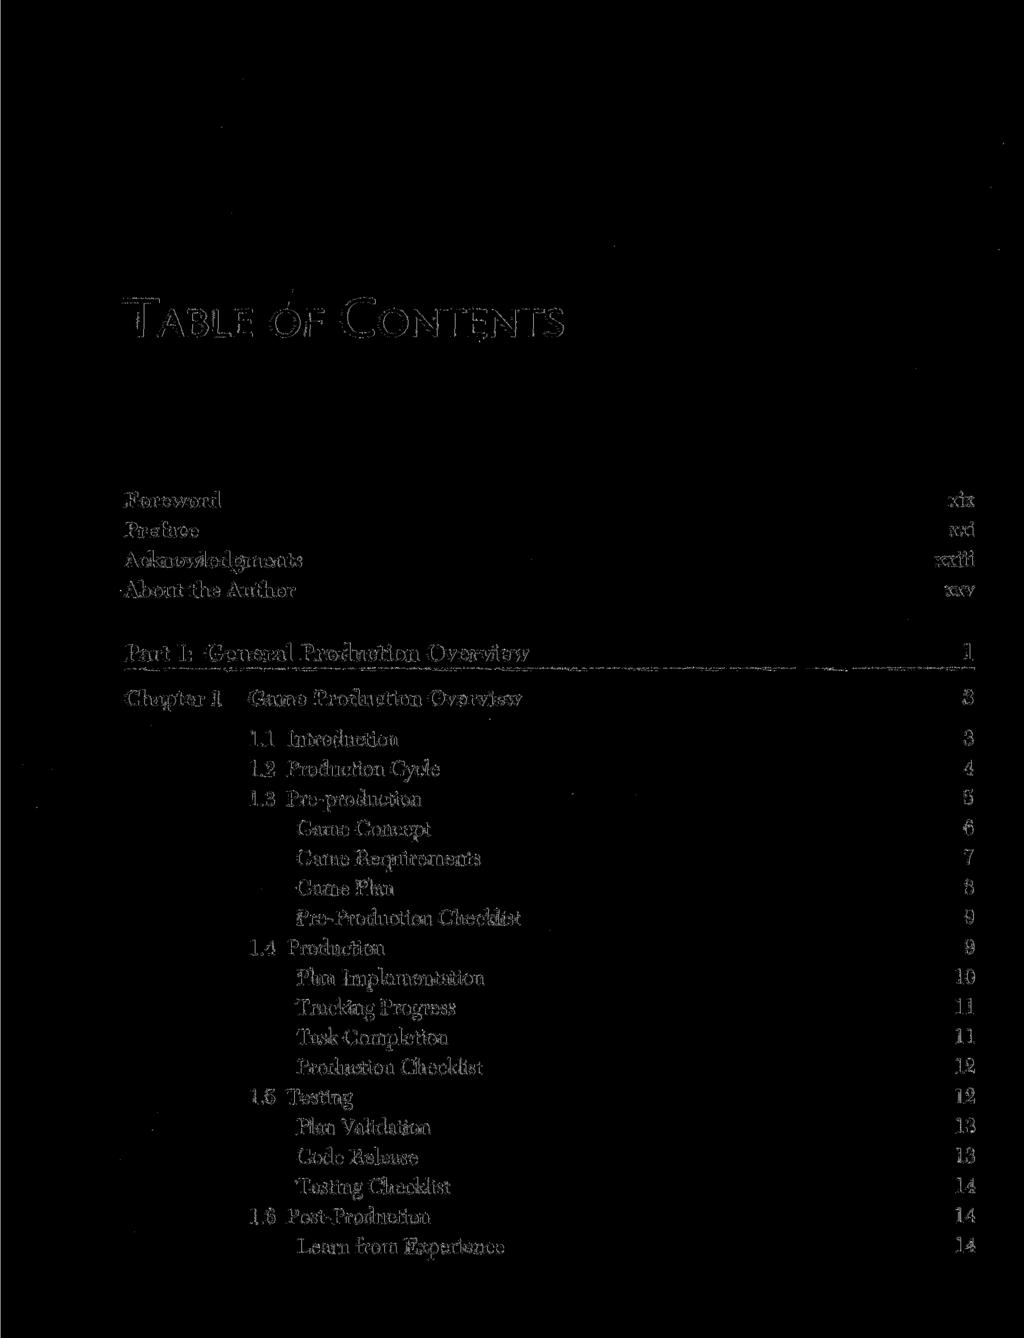 TABLE OF CONTENTS Foreword Preface Acknowledgments About the Author xix xxi radii xxv Parti: General Production Overview 1 Chapter 1 Came Production Overview 3 1.1 Introduction 3 1.